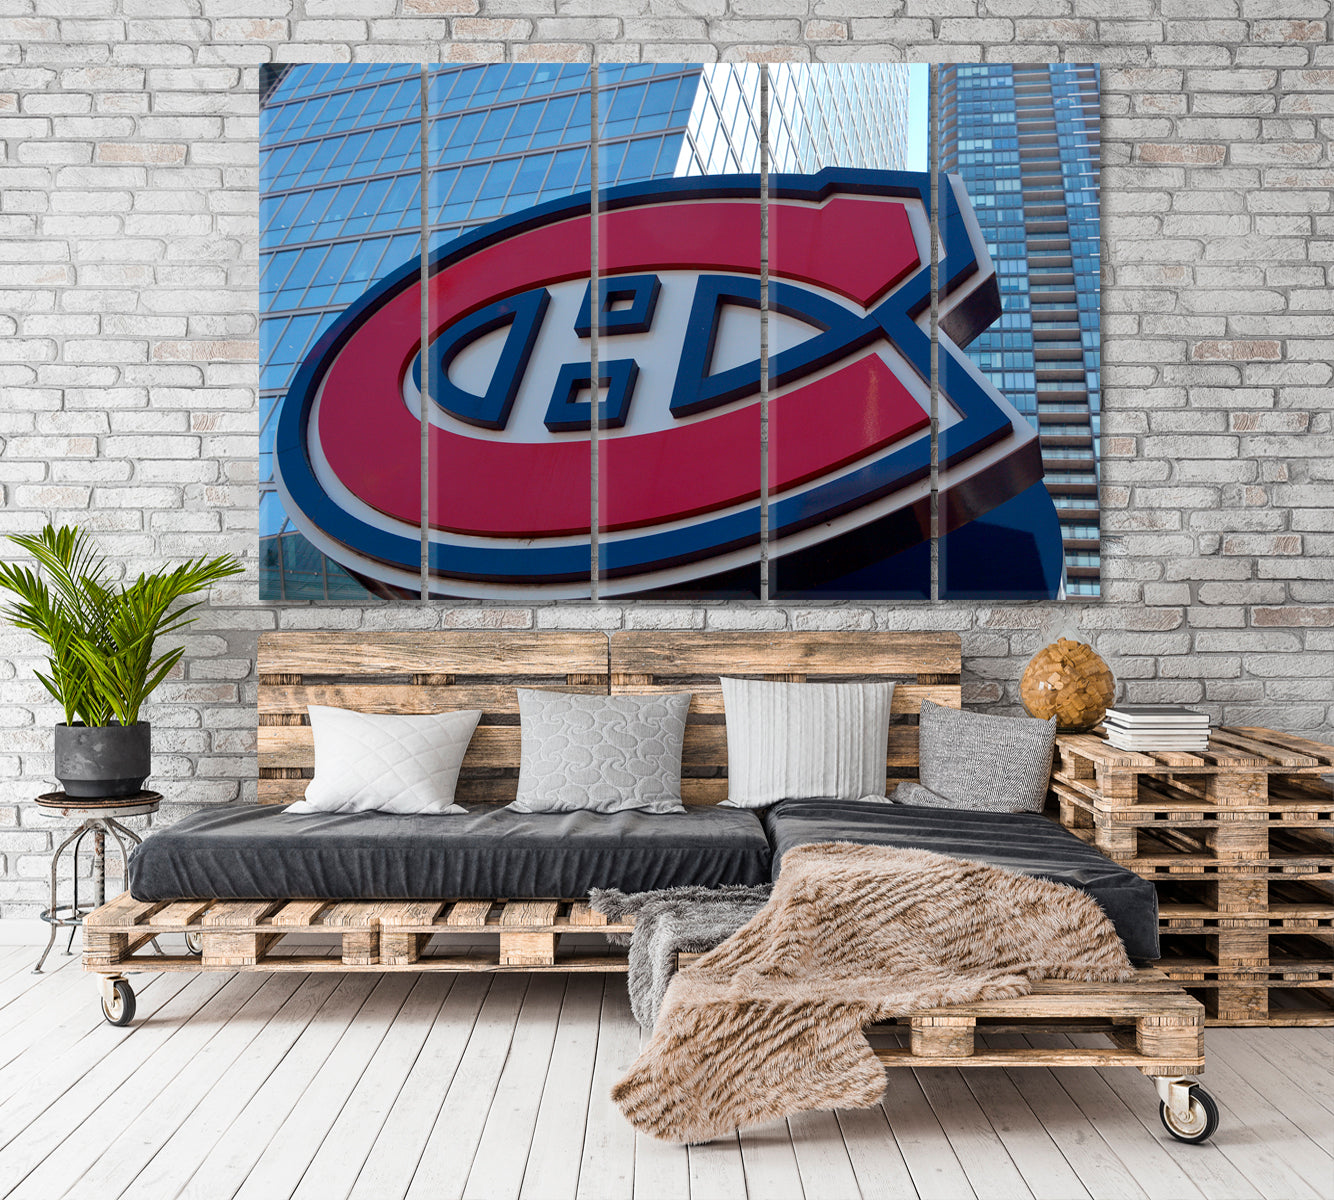 Canada Quebec Montreal Bell Centre Hall of Fame Canvas Print Famous Landmarks Artwork Print Artesty 5 panels 36" x 24" 